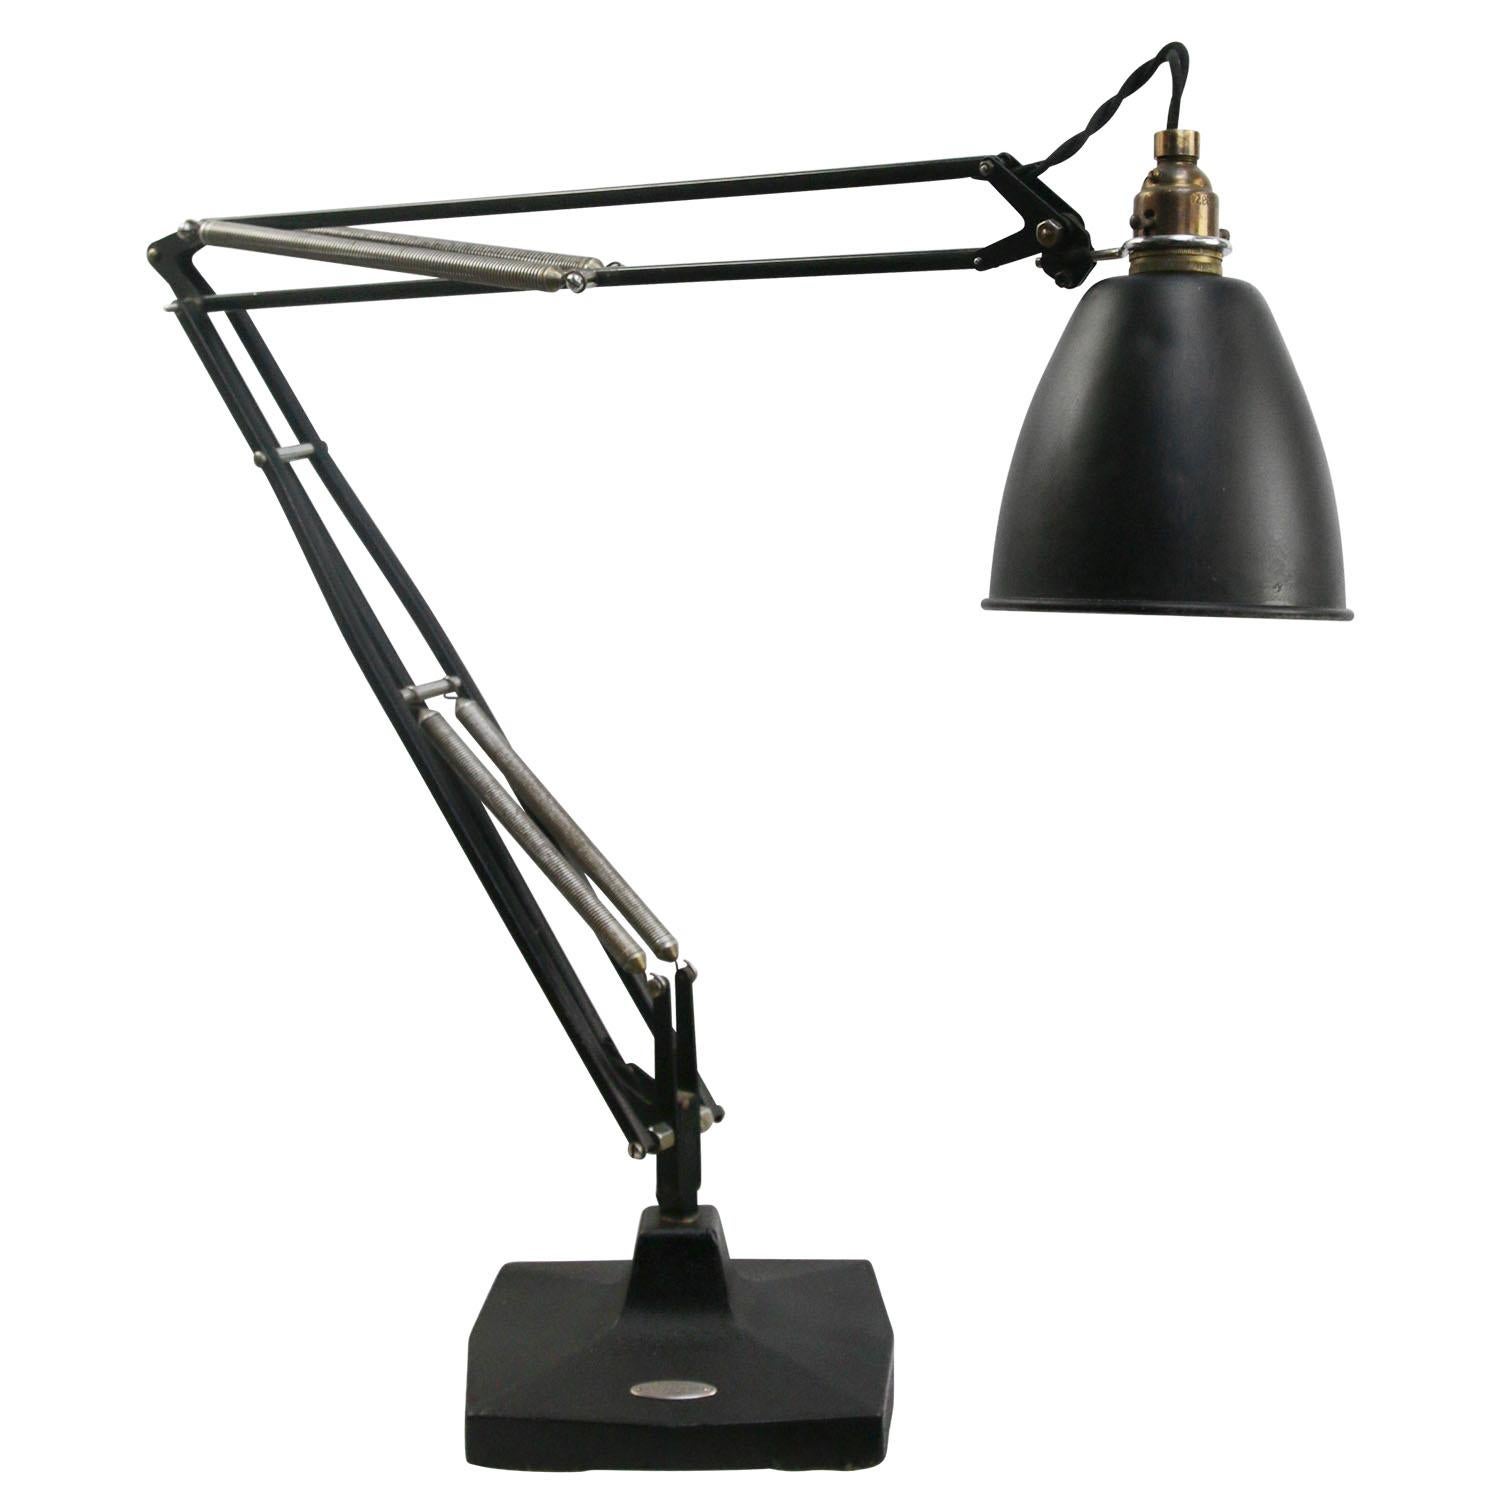 Anglepoise Model 1208
Adjustable in height and angle scissor desk lamp.
Made in Britain by Anglepoise for H. Stopler, Utrecht. Medical Instruments
Design by Herbert Terry & Sons

E27 . Bajonet

Weight: 7.30 kg / 16.1 lb

Priced per